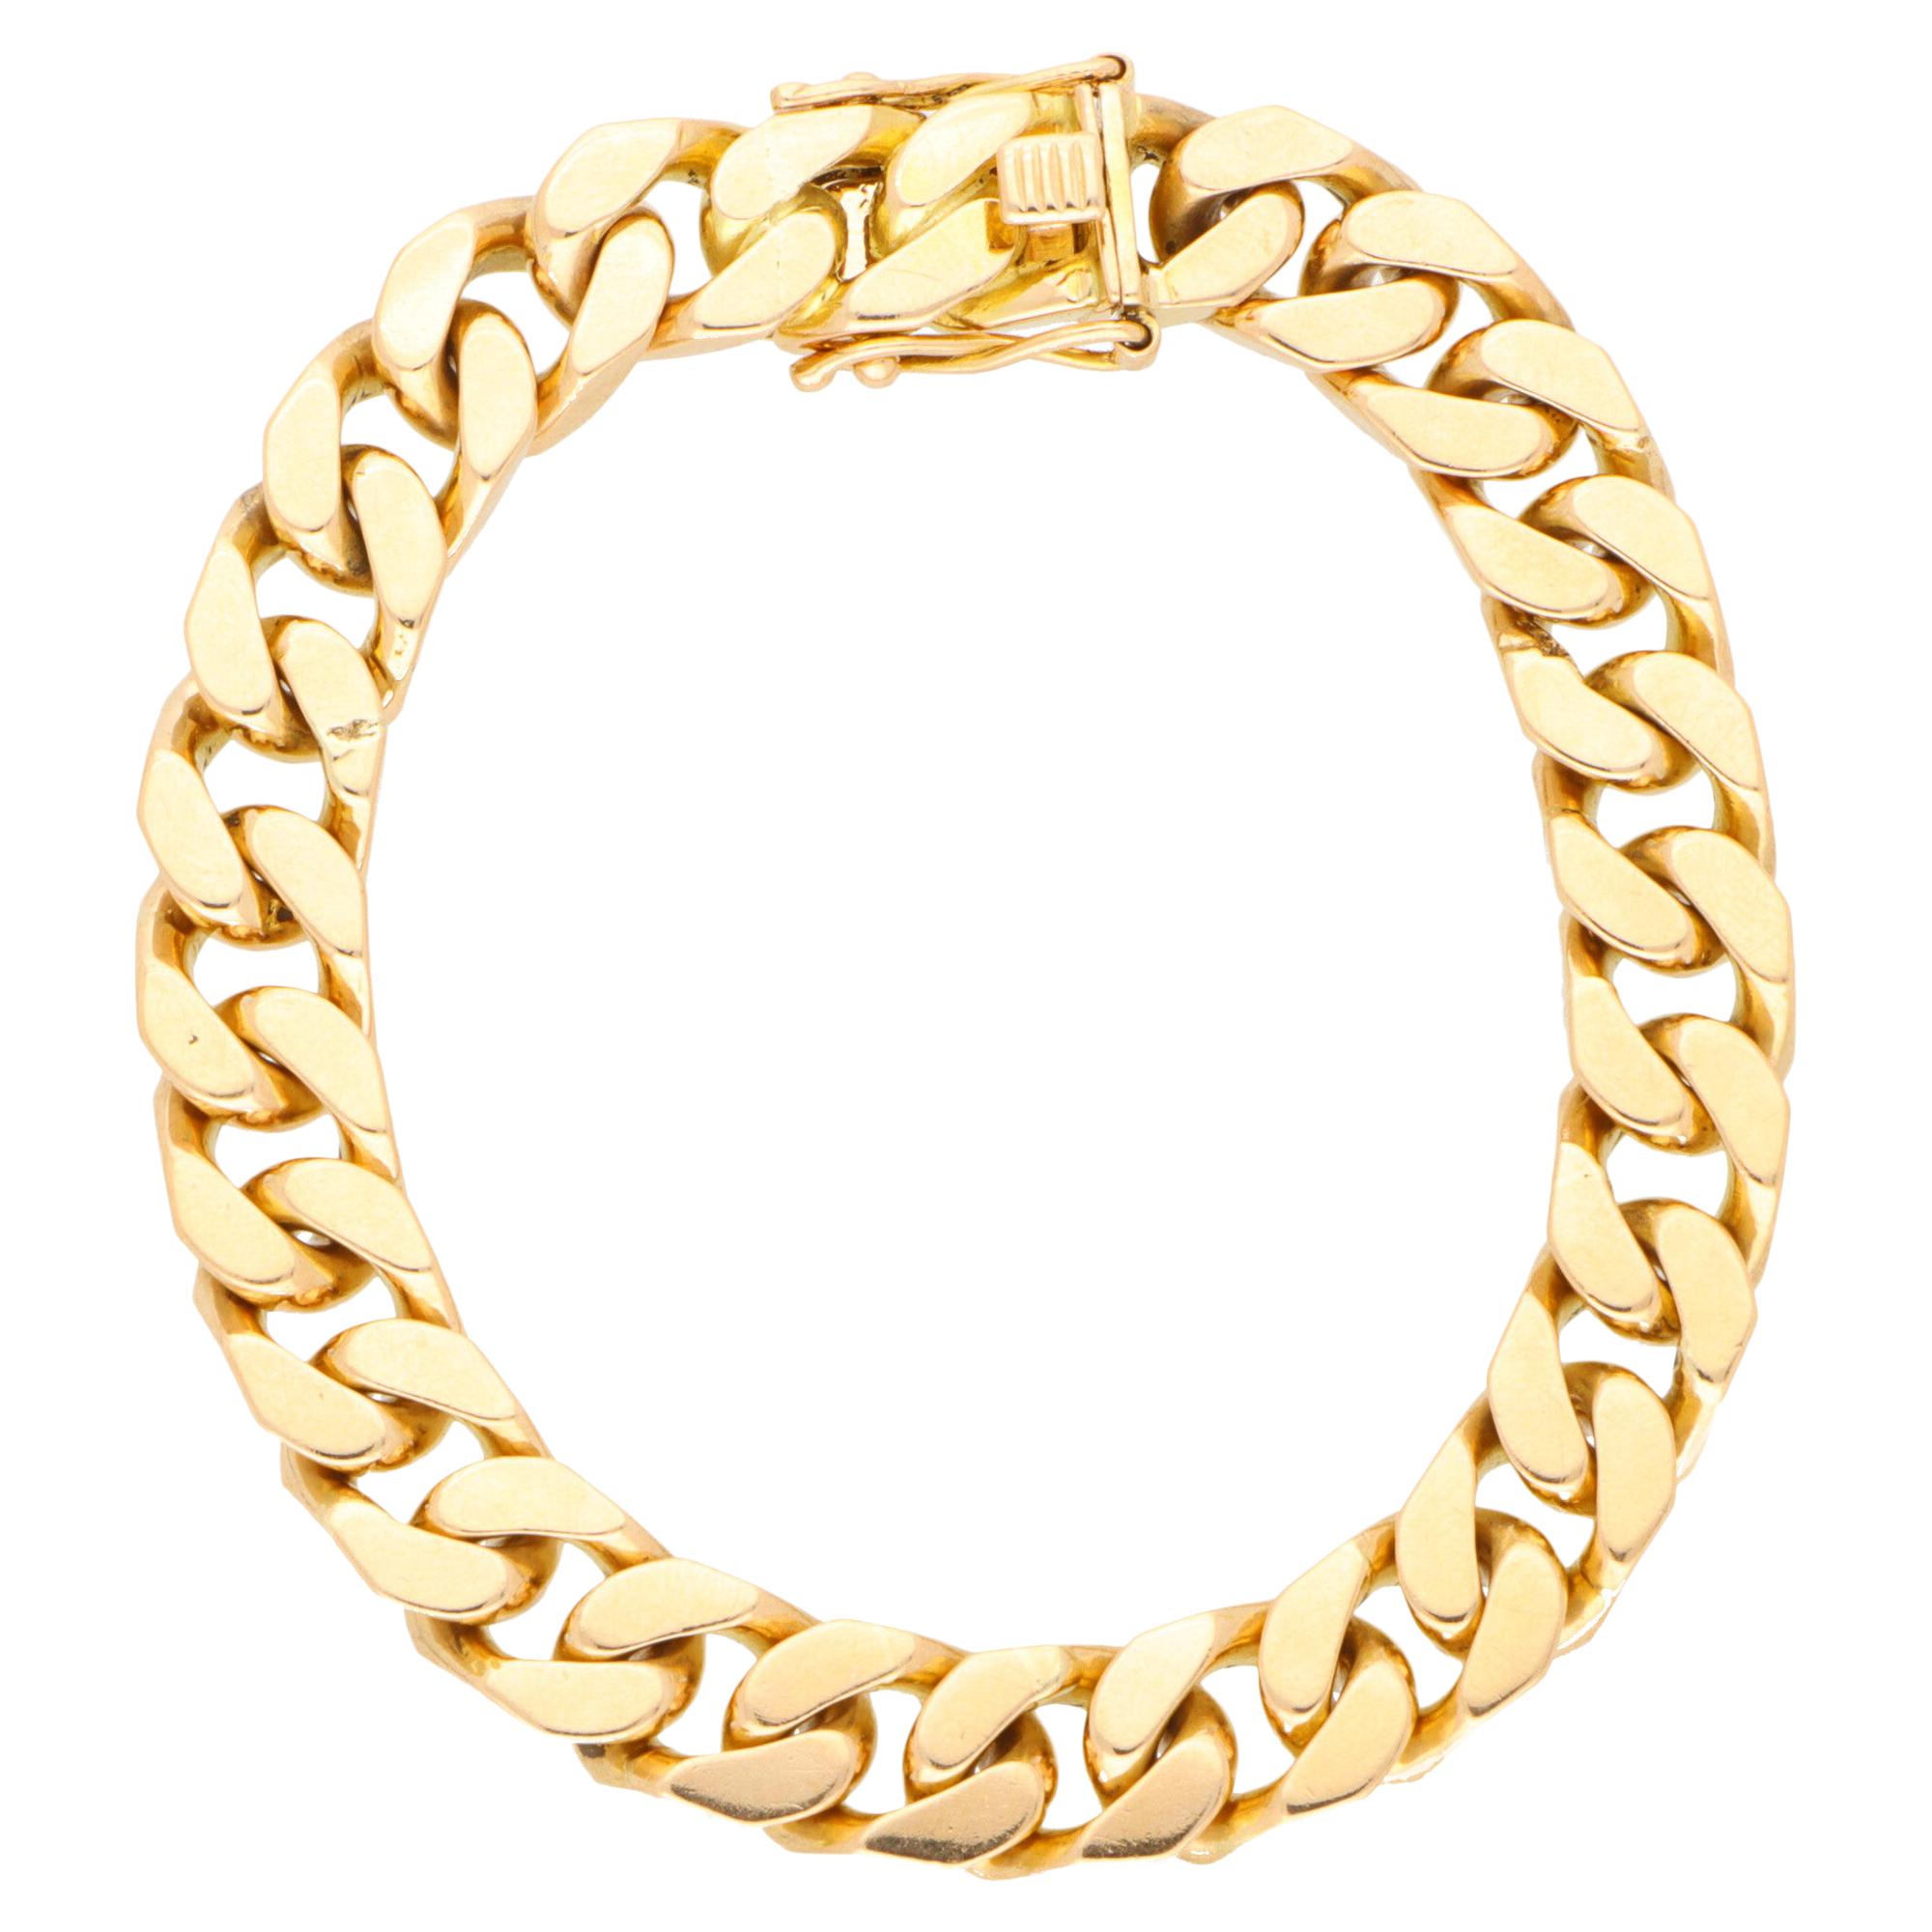 Vintage Flat Curb Link Chain Bracelet Set in Solid 18k Yellow Gold